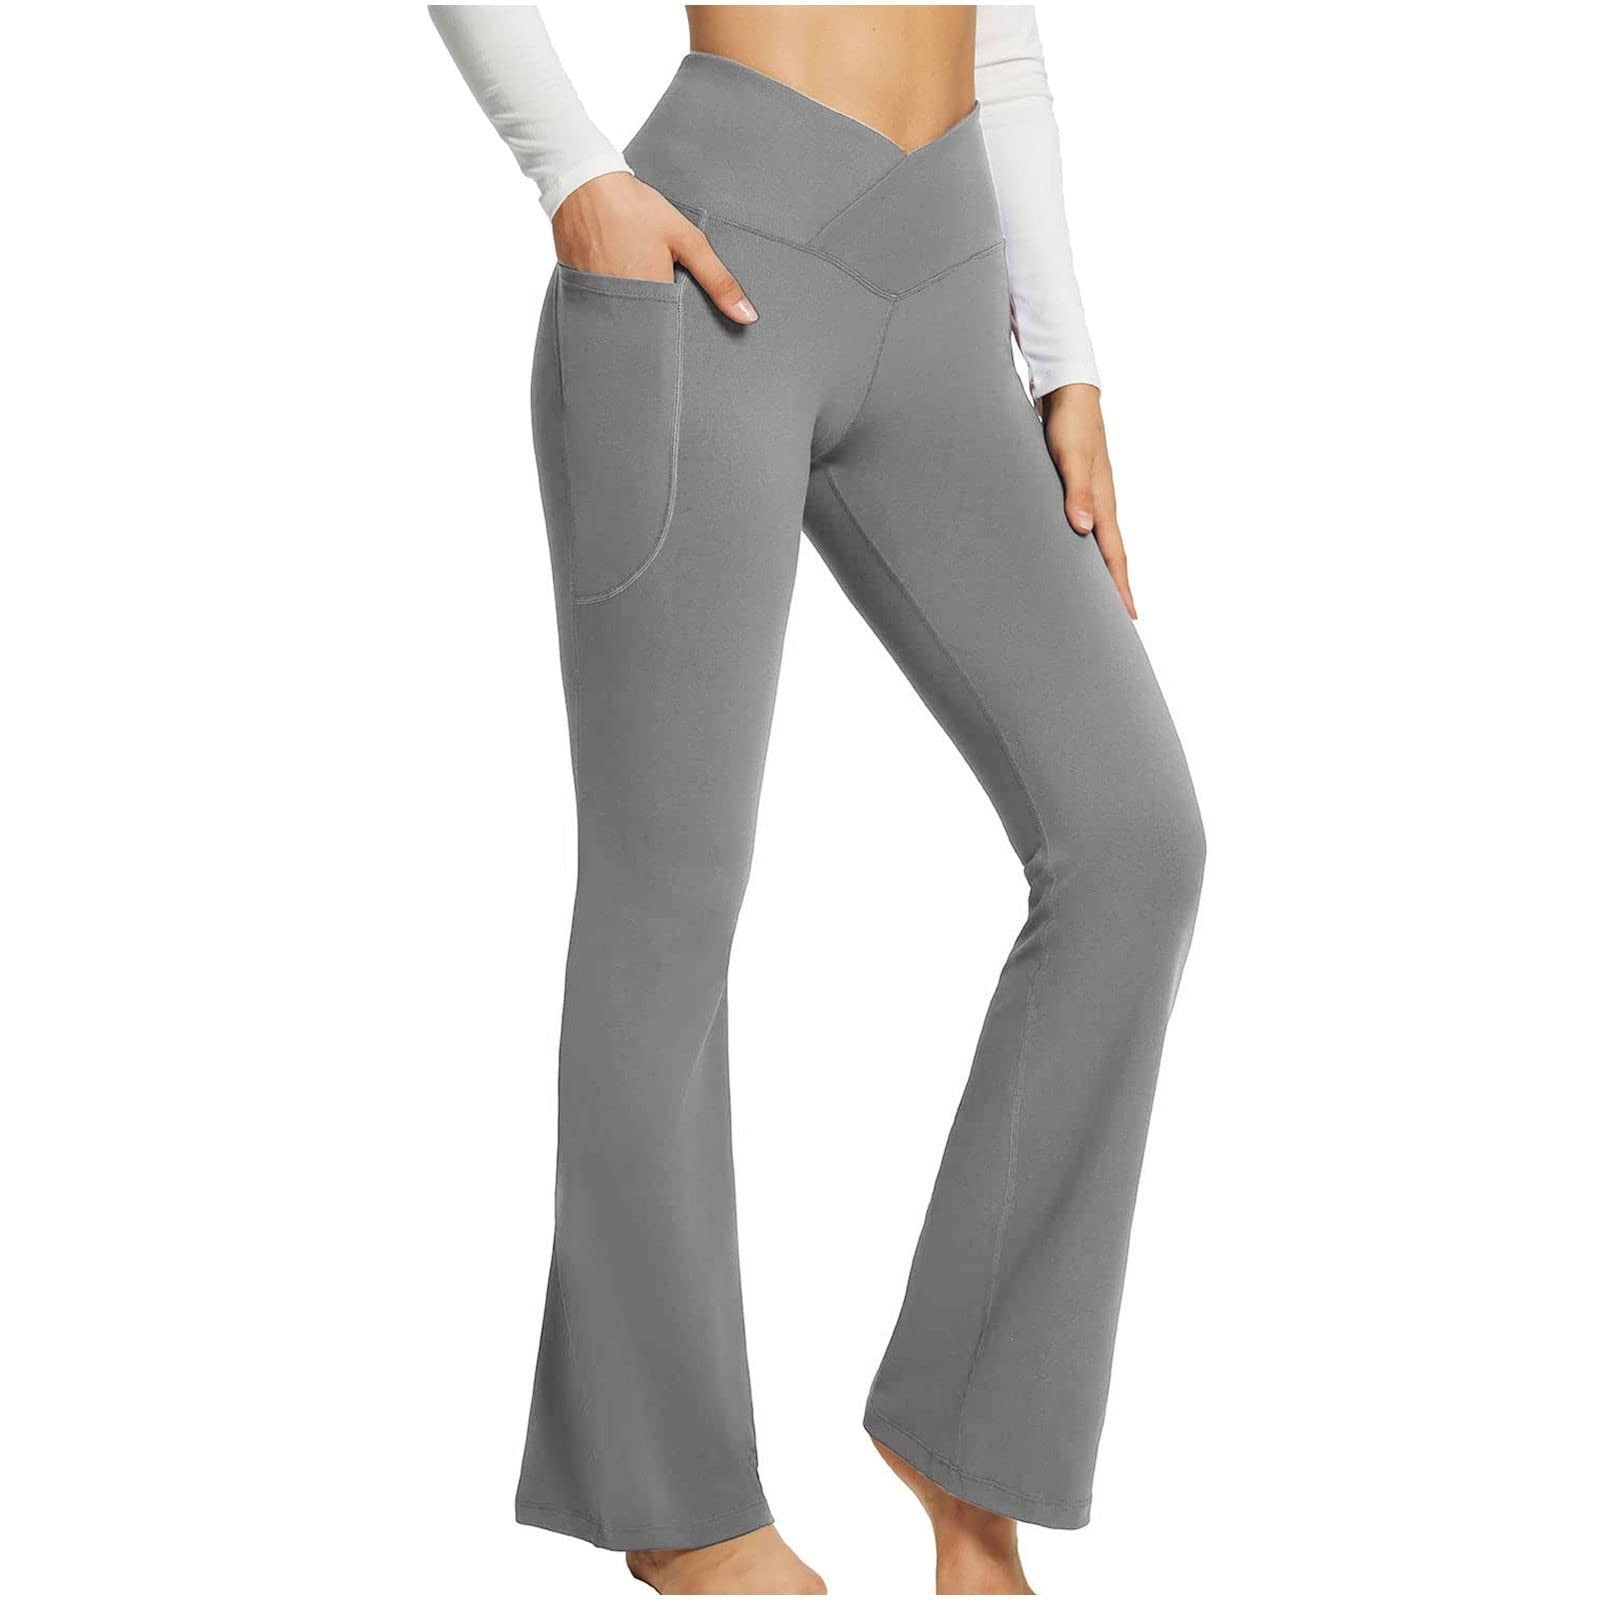 Clearance! Easter Gifts, High Waisted Leggings for Women, High Waisted Pants  for Women, Grey Flare Leggings, Going Out Pants for Women, Criss Cross  Leggings for Women, Jogger Leggings 